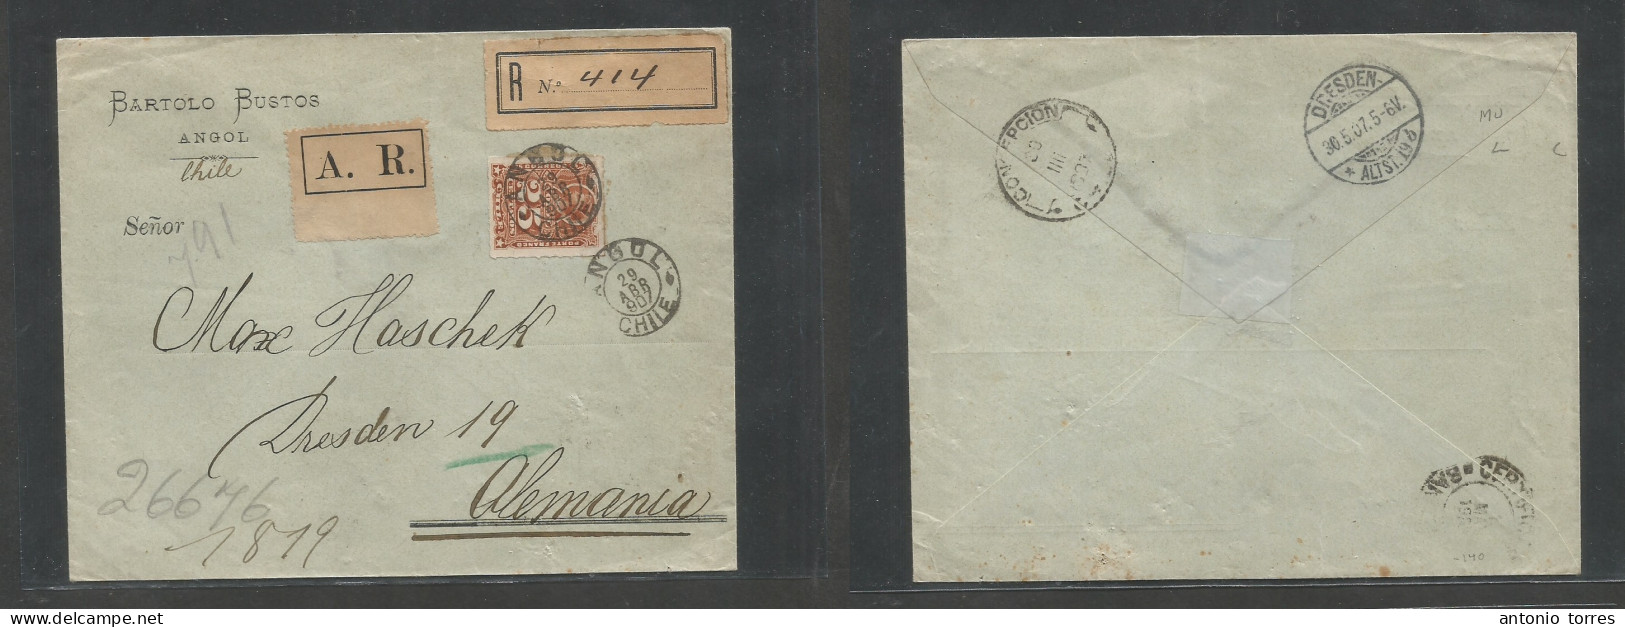 Chile - Xx. 1907 (29 Apr) Angol - Germany, Dresden (30 May) Comercial Registered AR Single 25c Brown Fkd Envelope, Tied - Chile